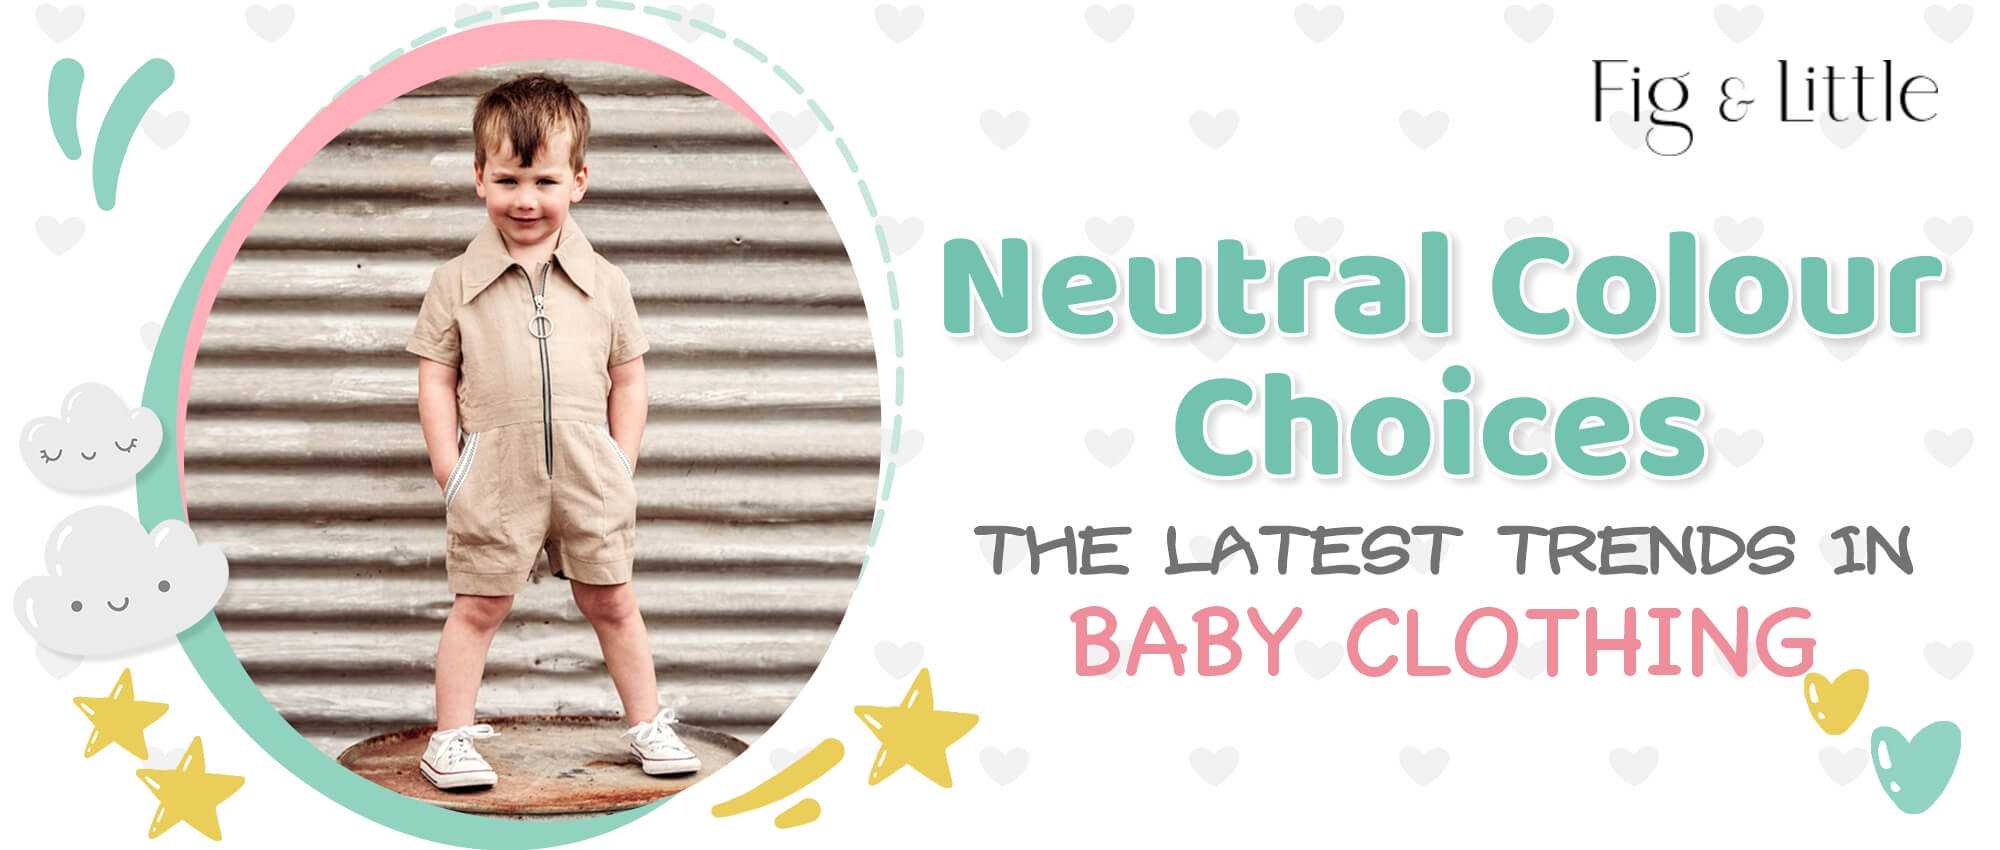 NEUTRAL COLOUR CHOICES - THE LATEST TRENDS IN BABY CLOTHING